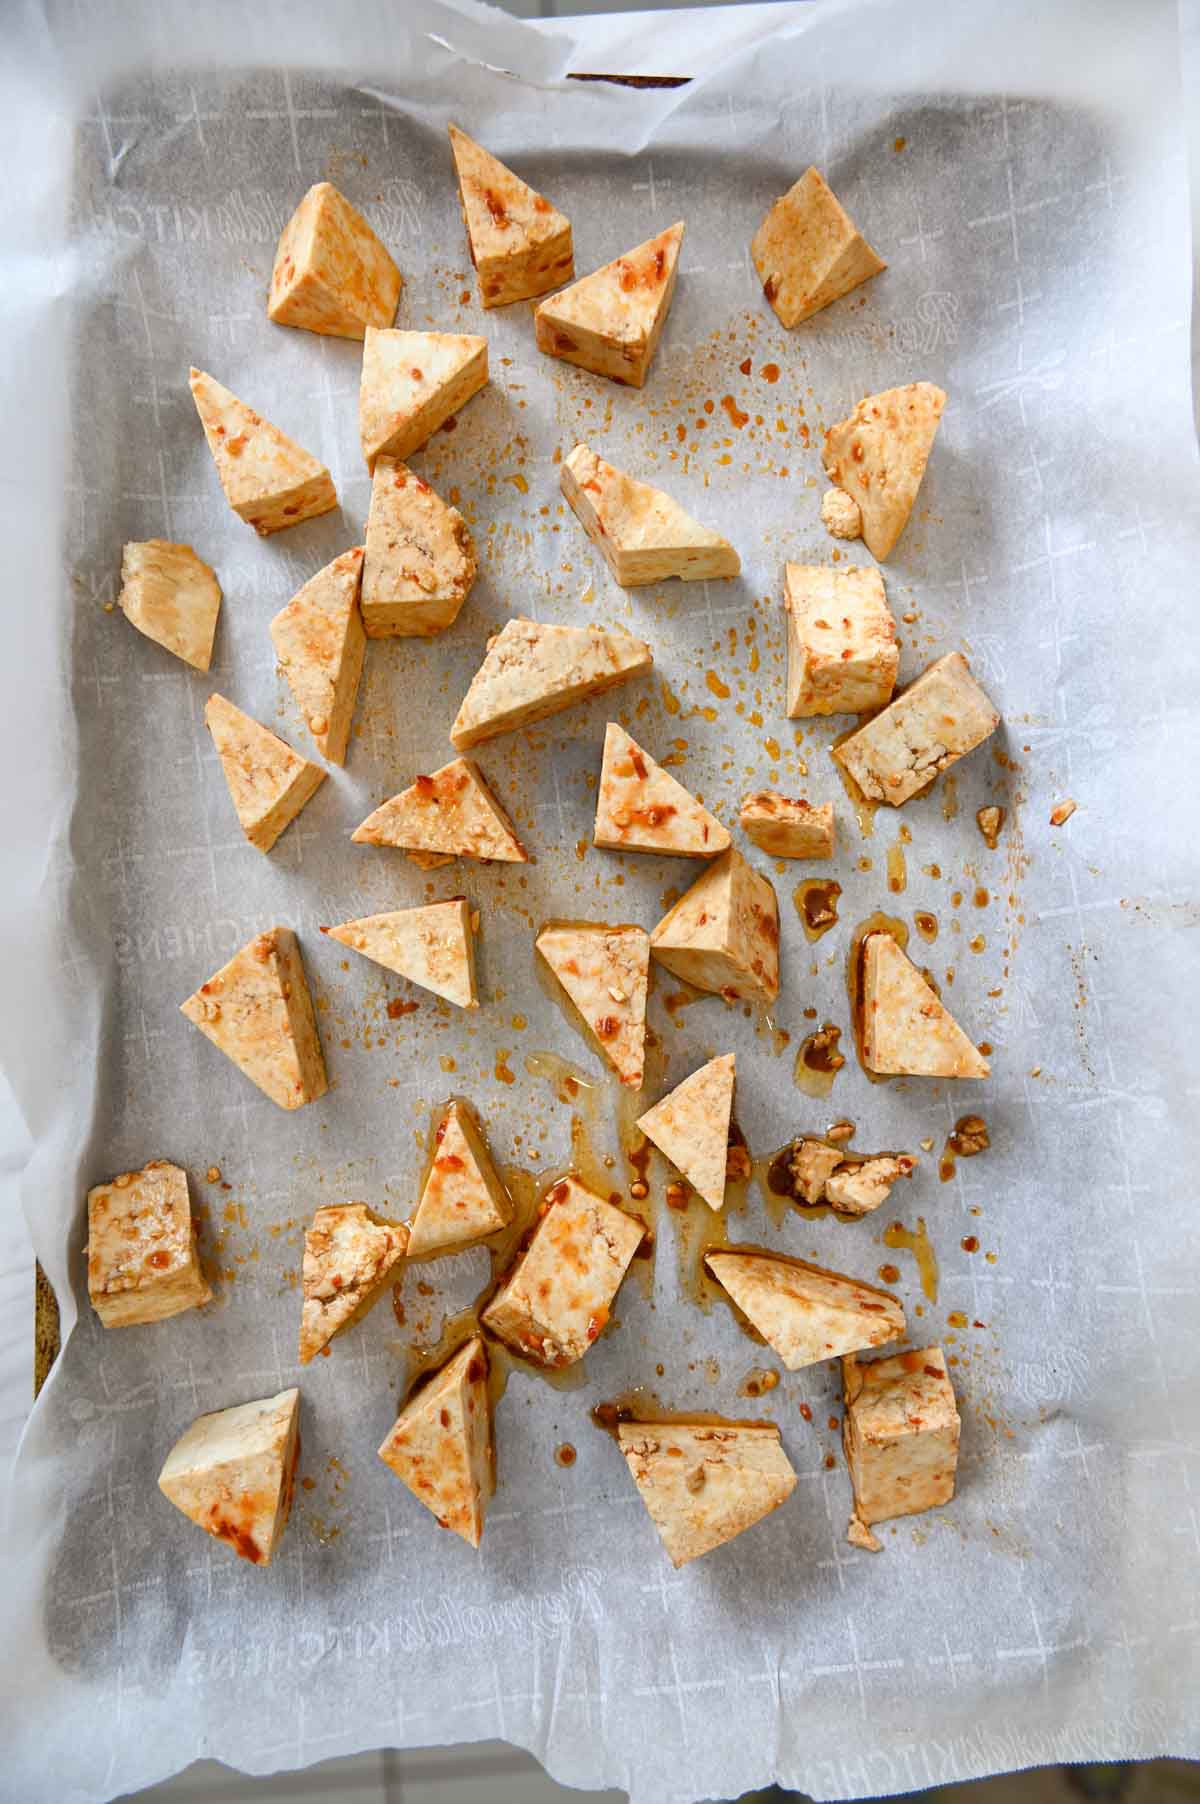 grilled tofu with almond chips